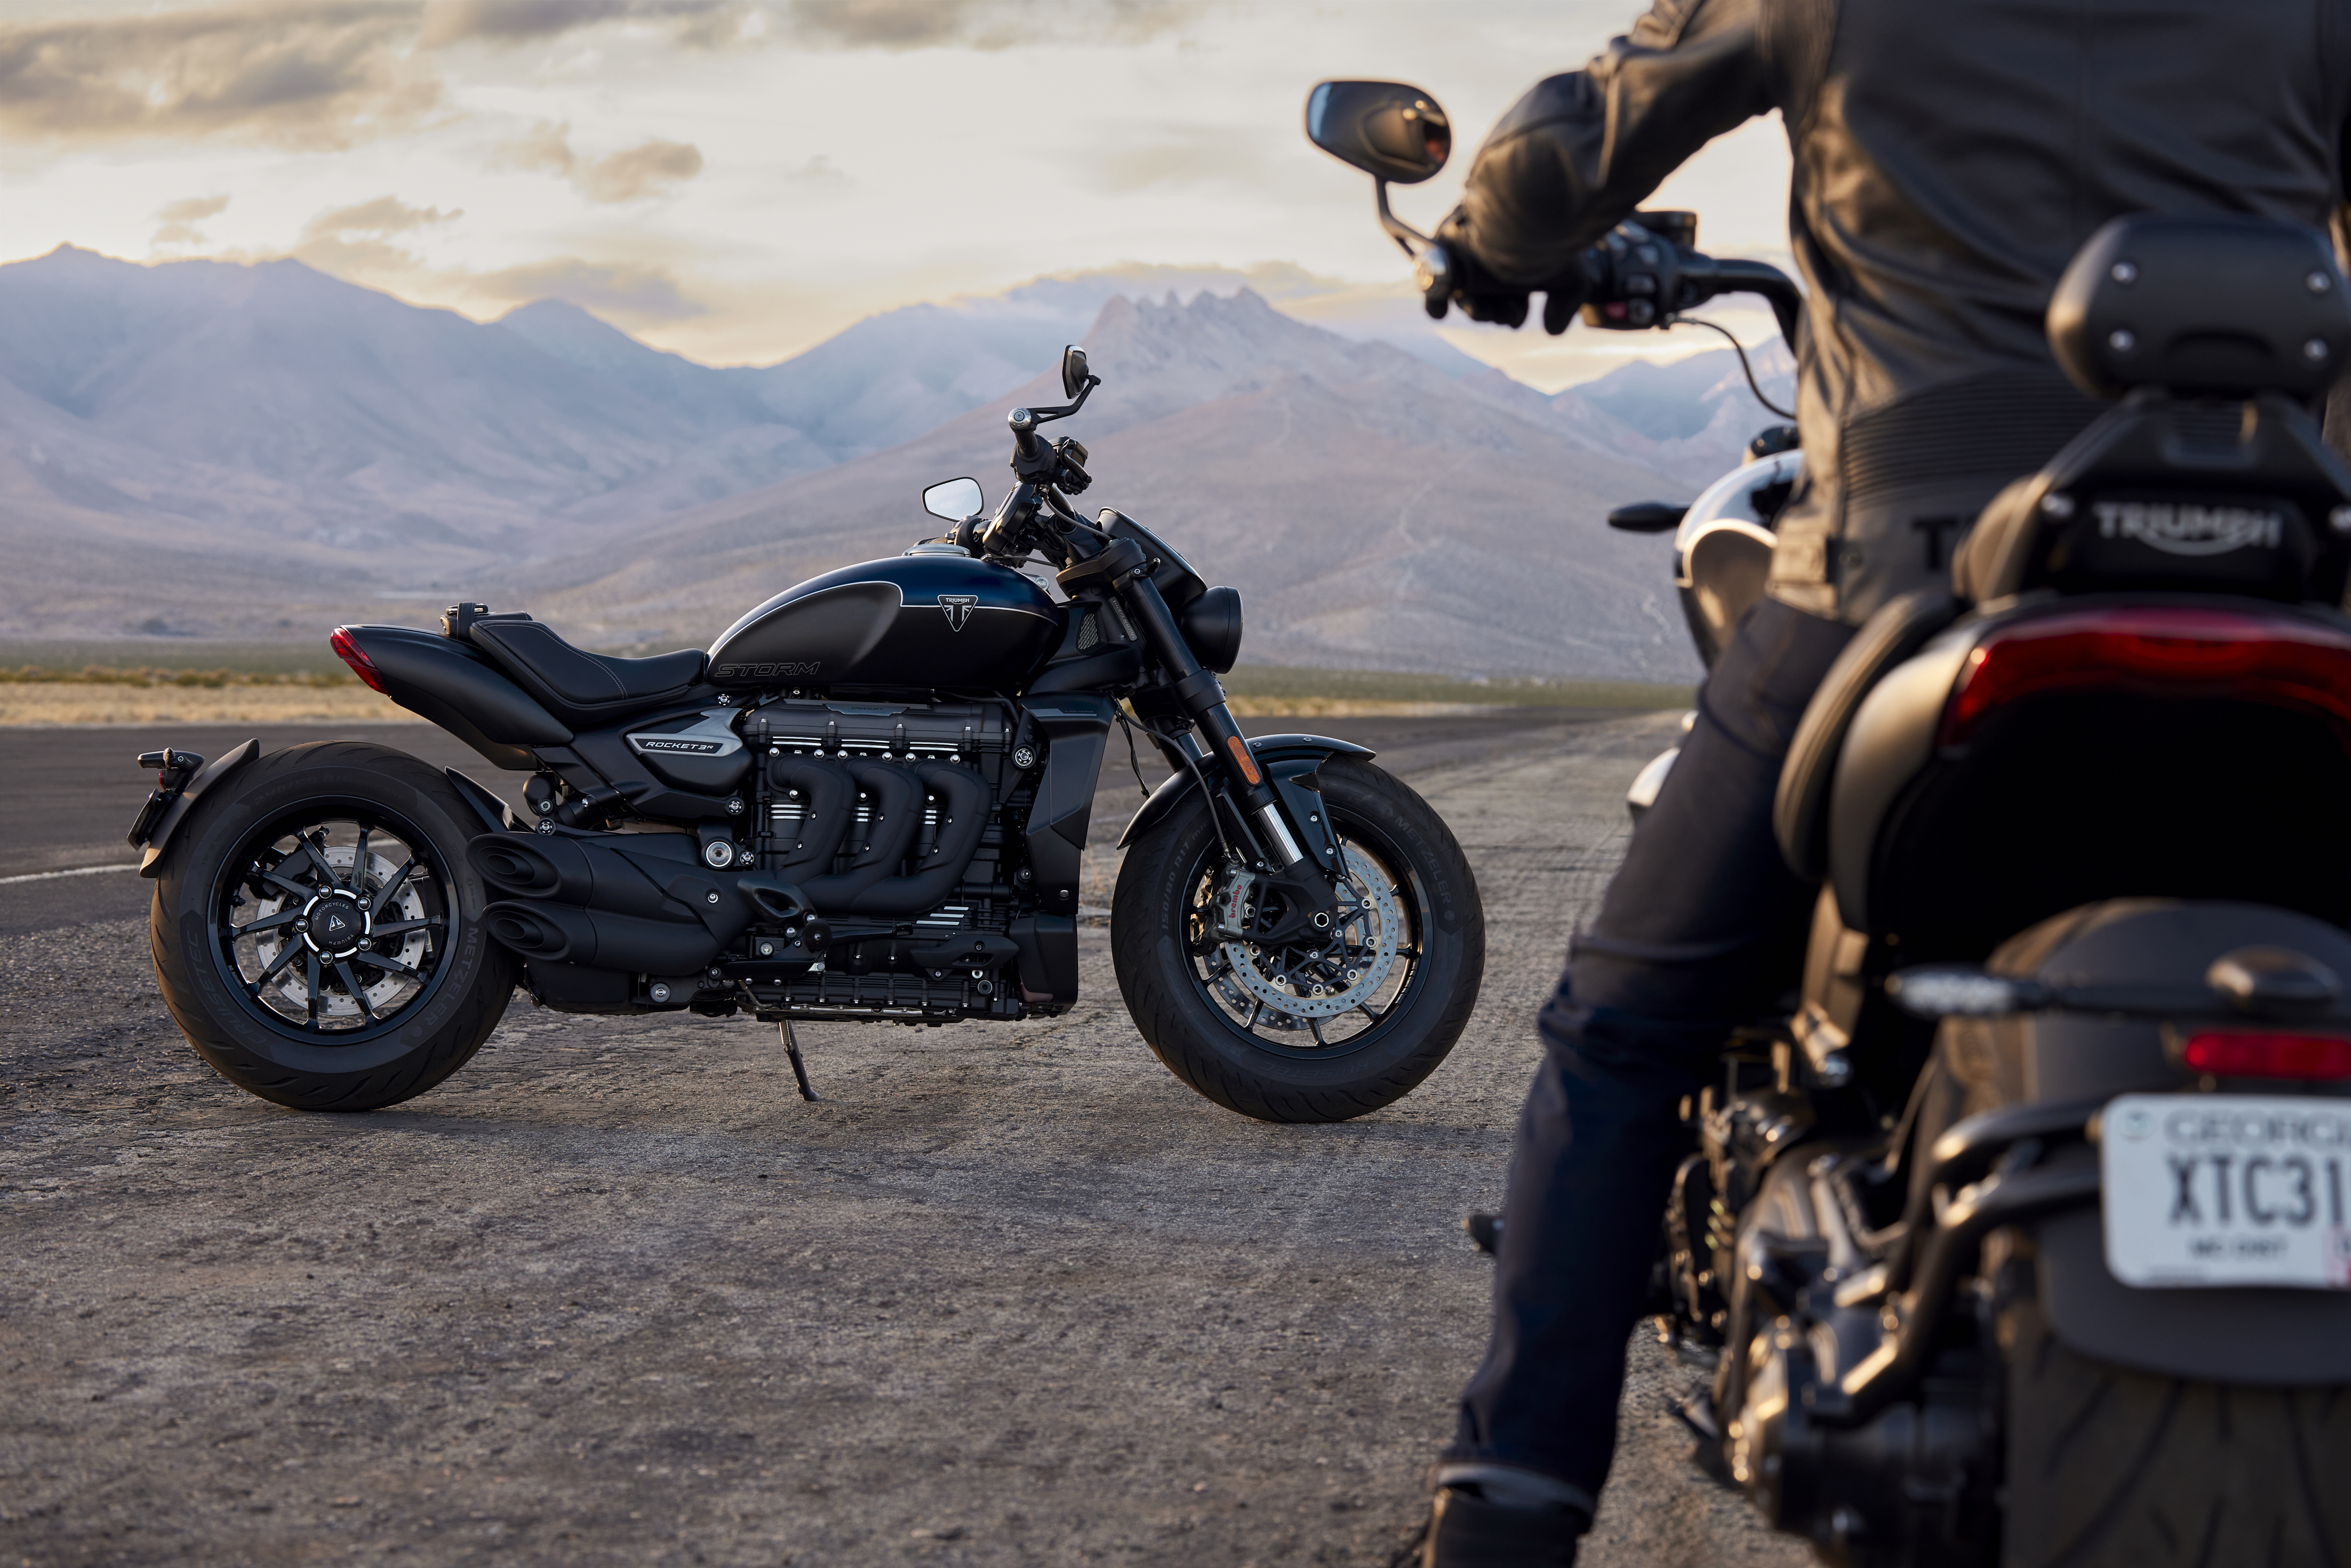 A Triumph Rocket 3 R Storm motorcycle parked on an open road with mountainous landscape in the background, showcasing its robust design and black finish.